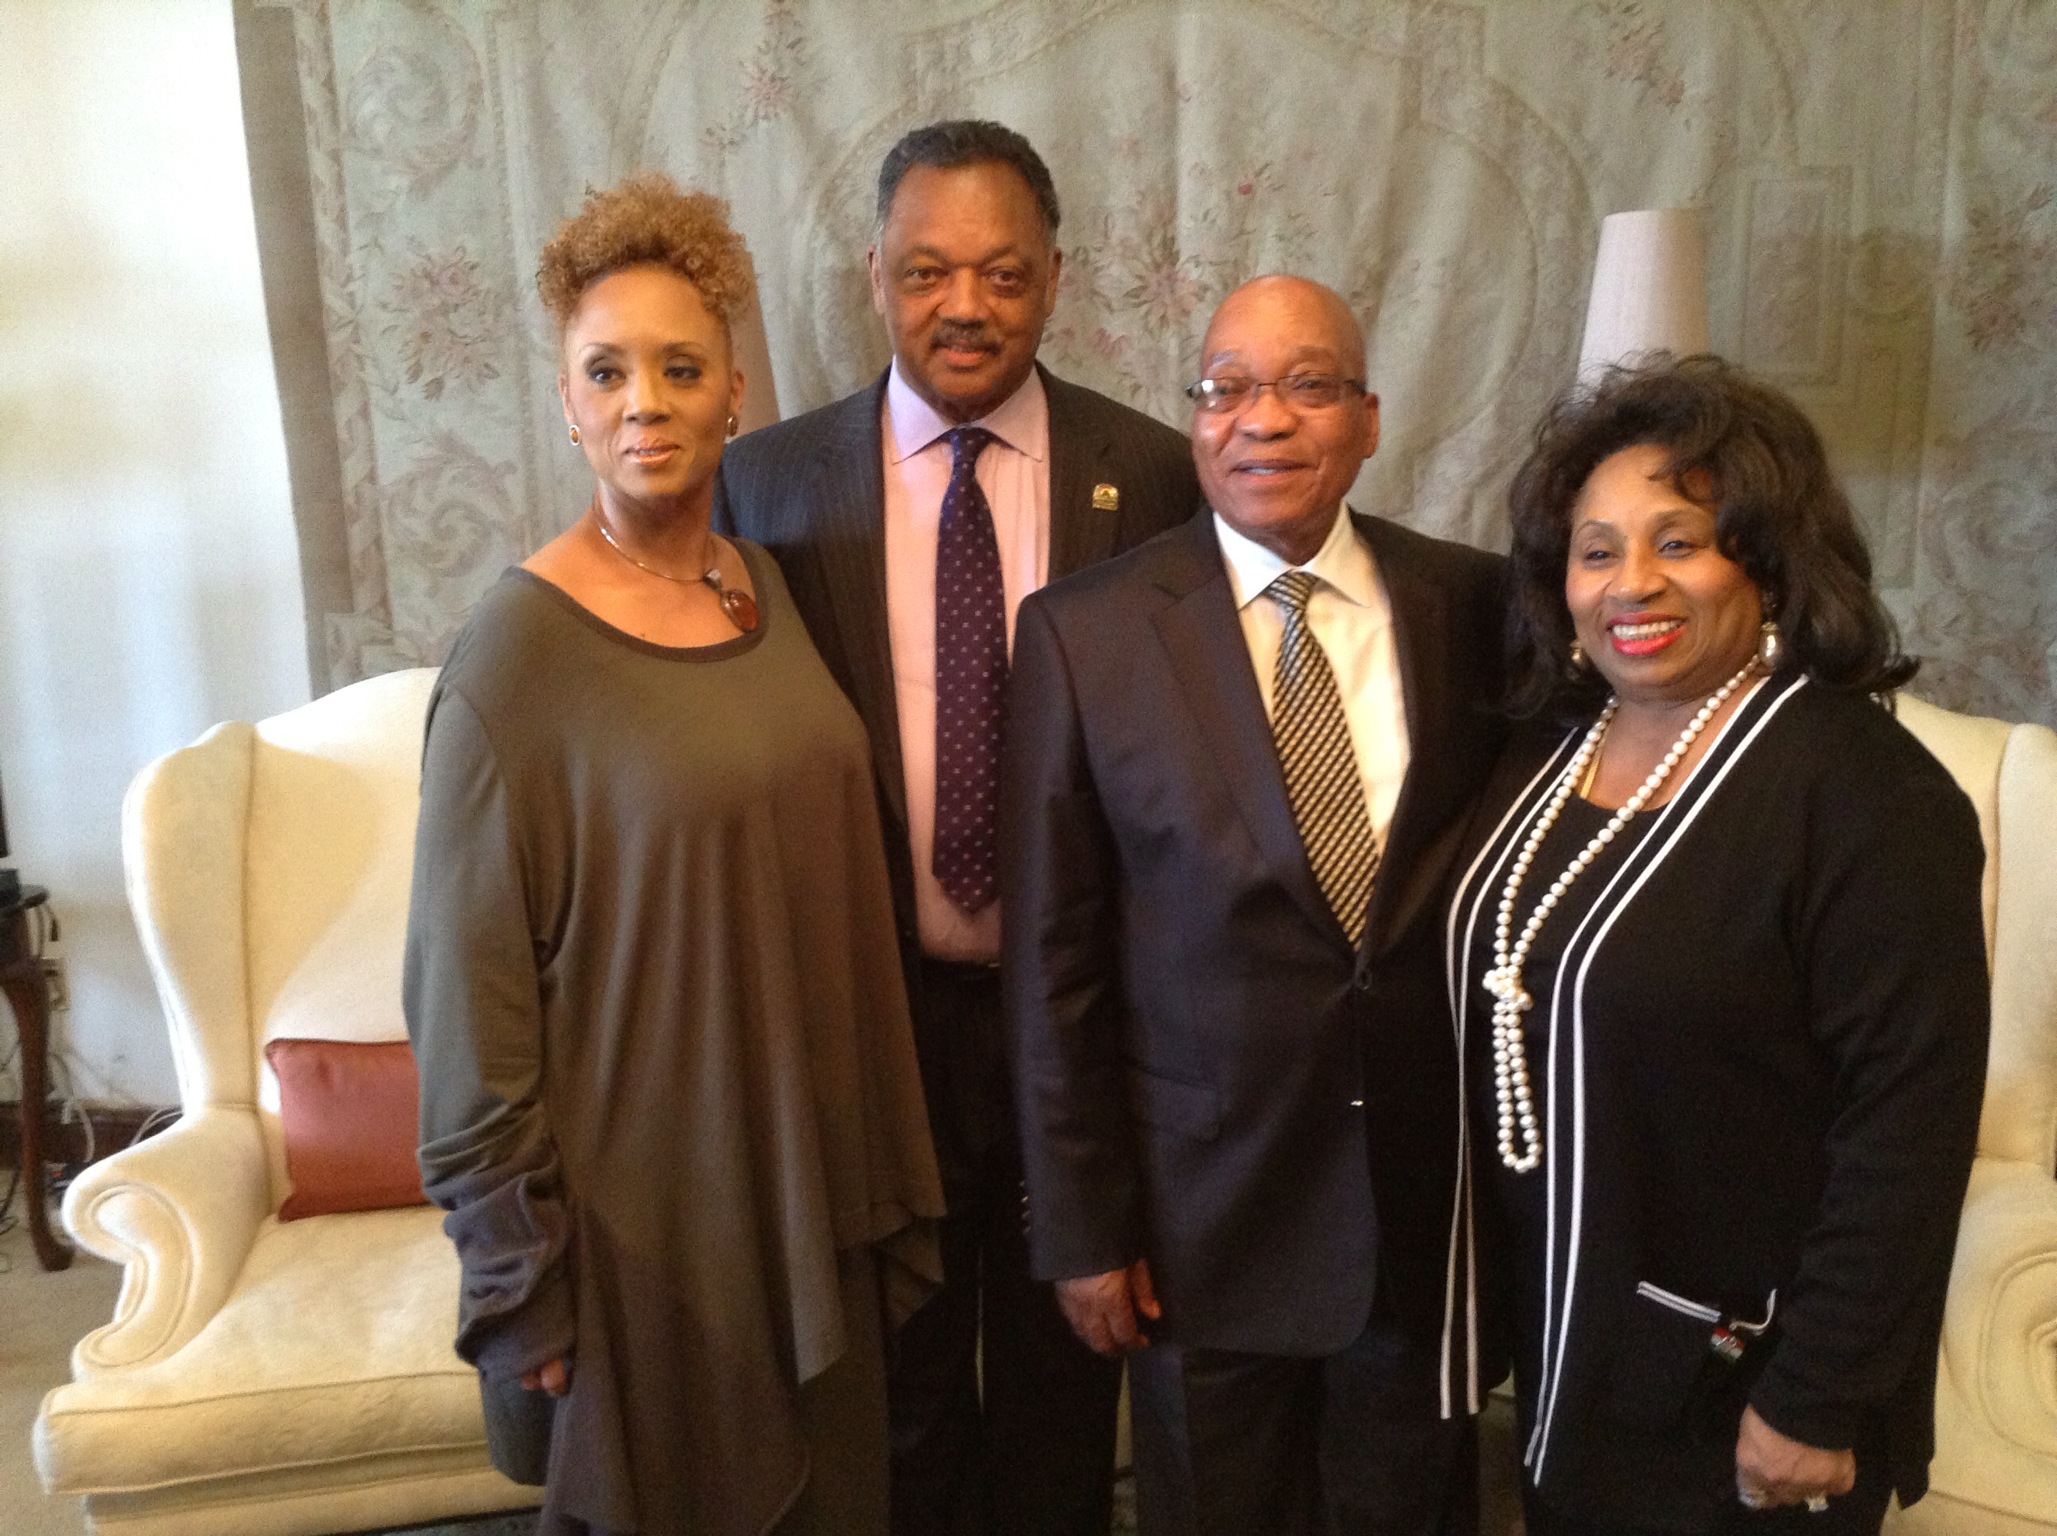 The Rev. Jesse L. Jackson, Sr., and his wife, Jacqueline, are now undergoing treatment in Chicago for COVID-19, a virus that causes cancer.